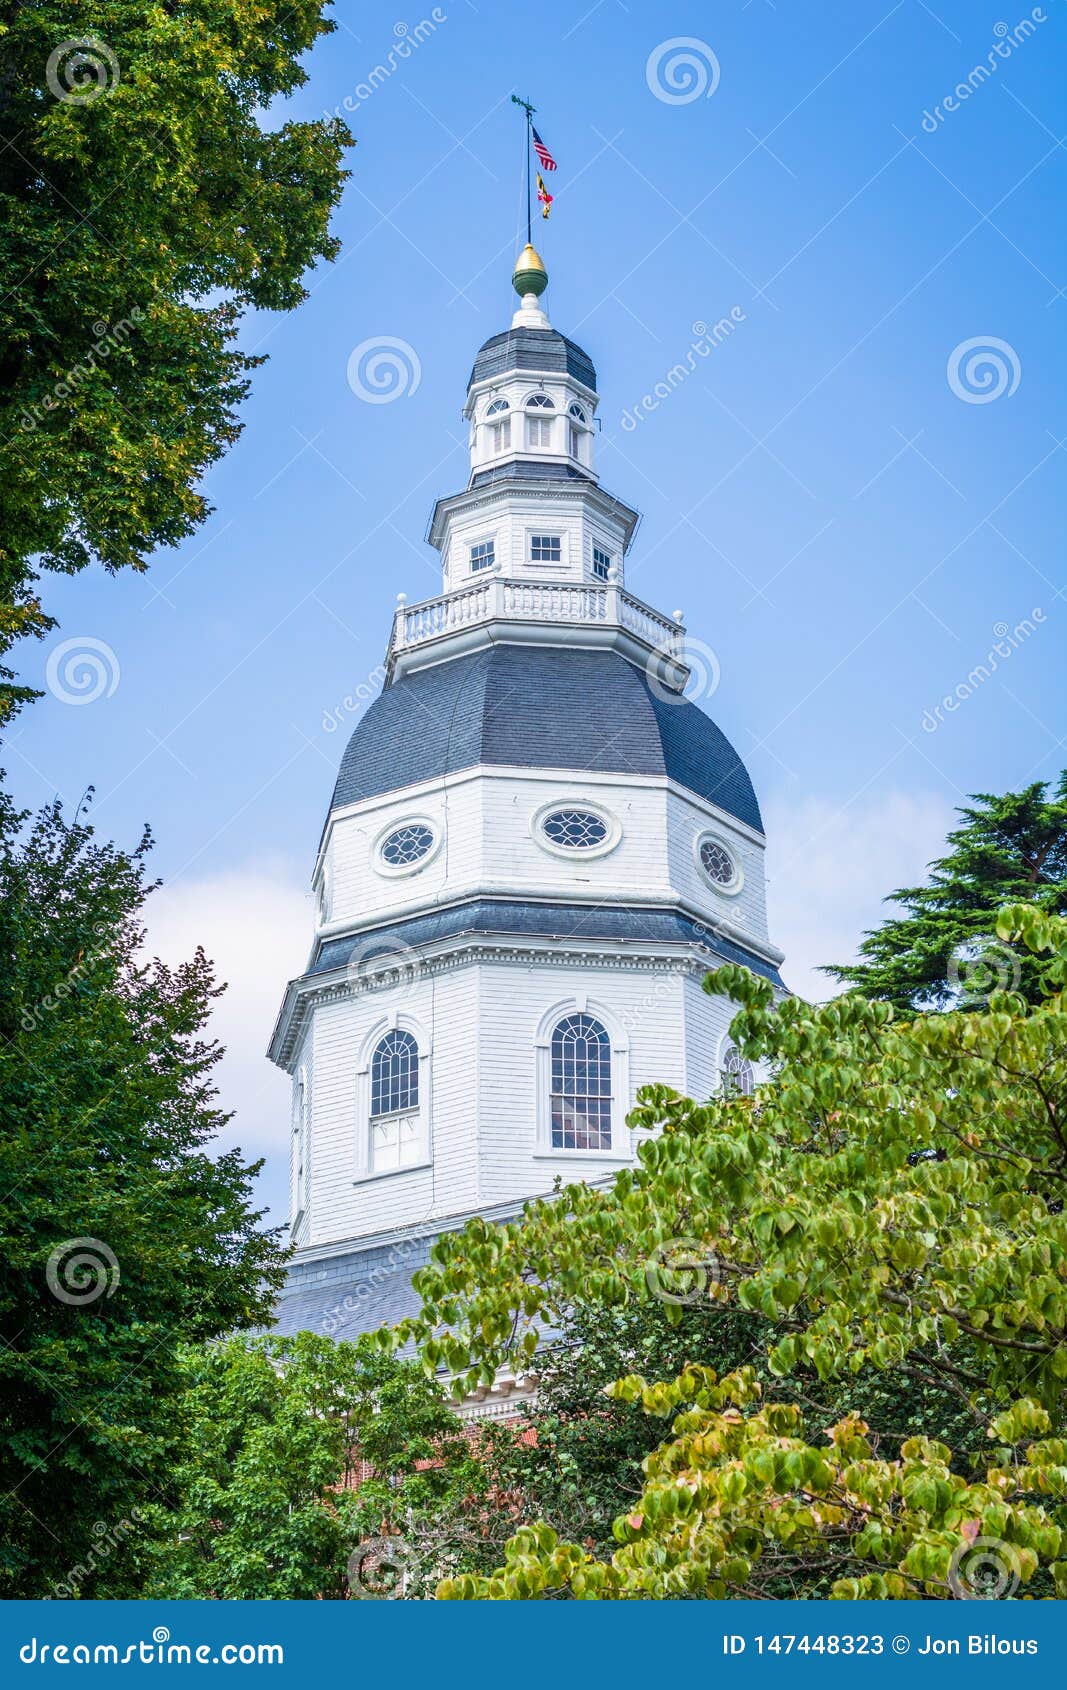 the maryland state house, in annapolis, maryland